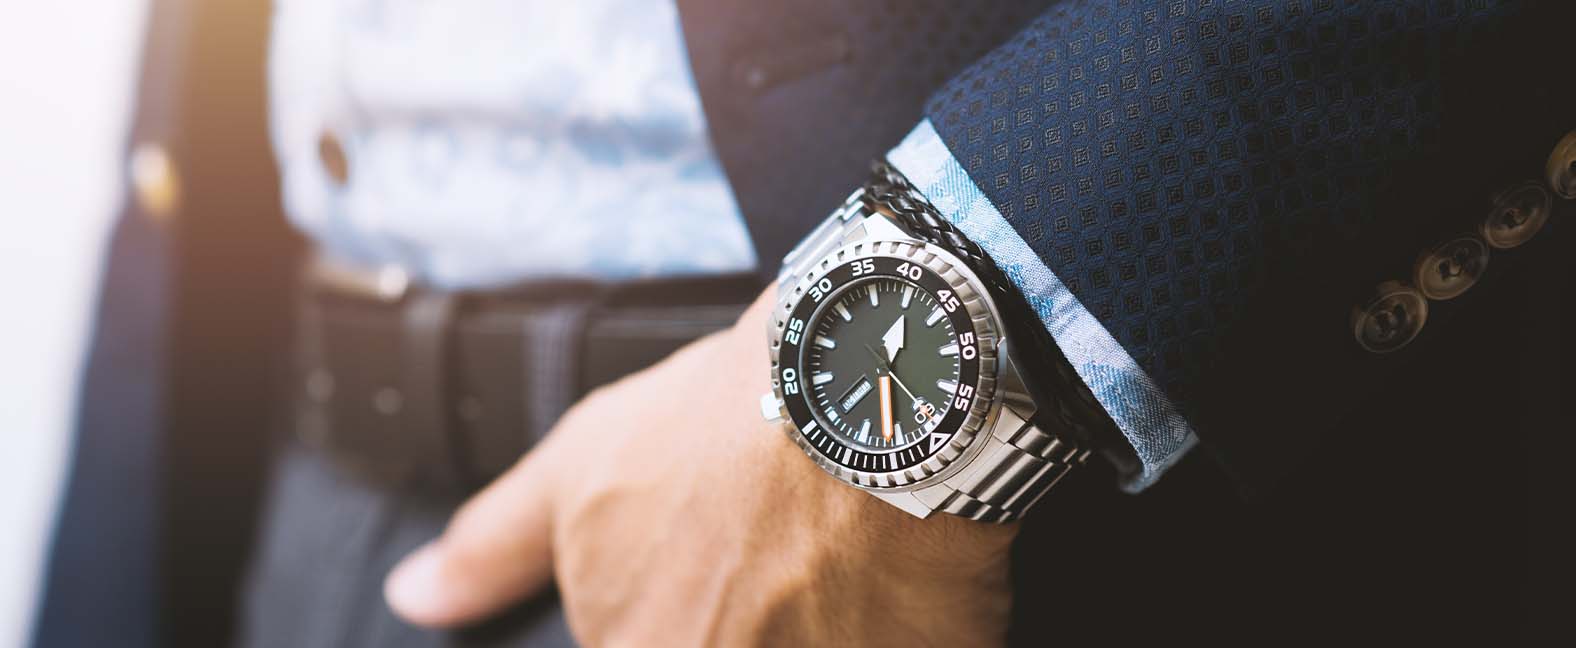 A luxury watch on the wrist of a man wearing a suit.